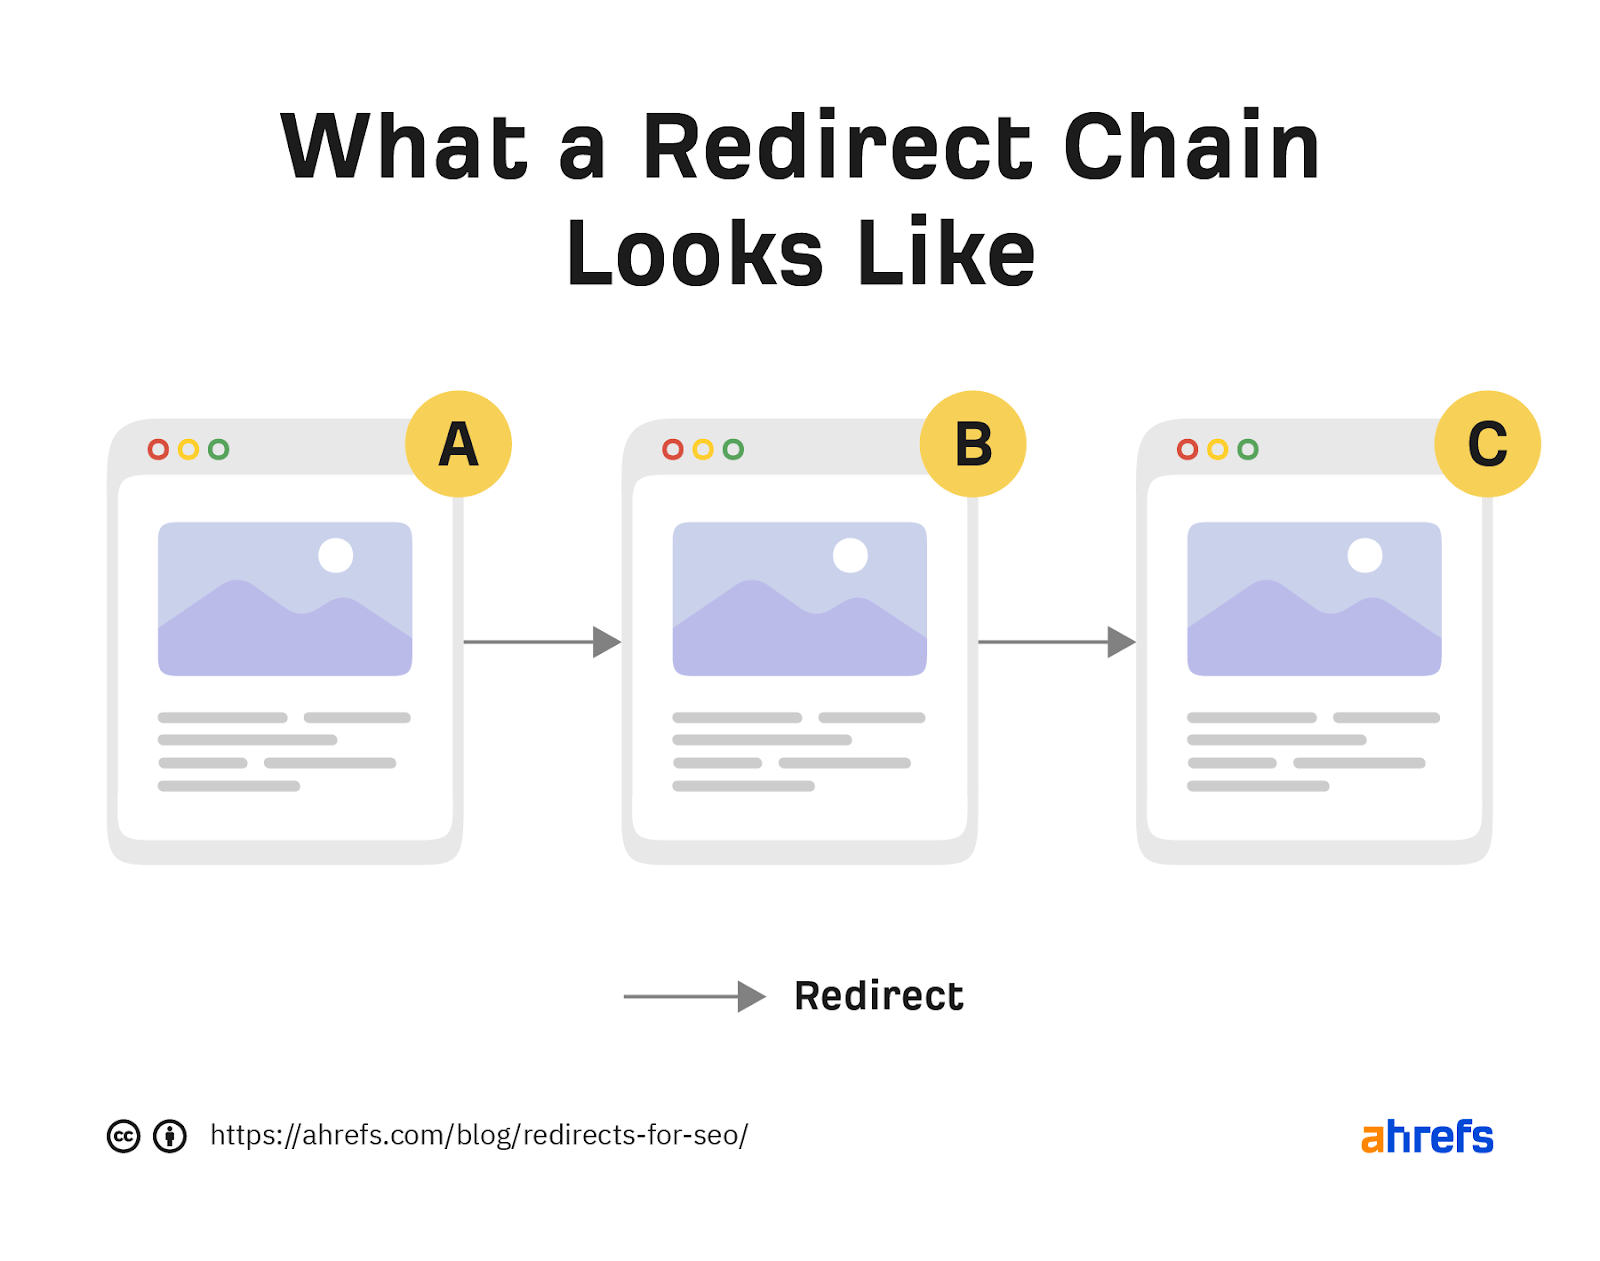 What a redirect chain looks like